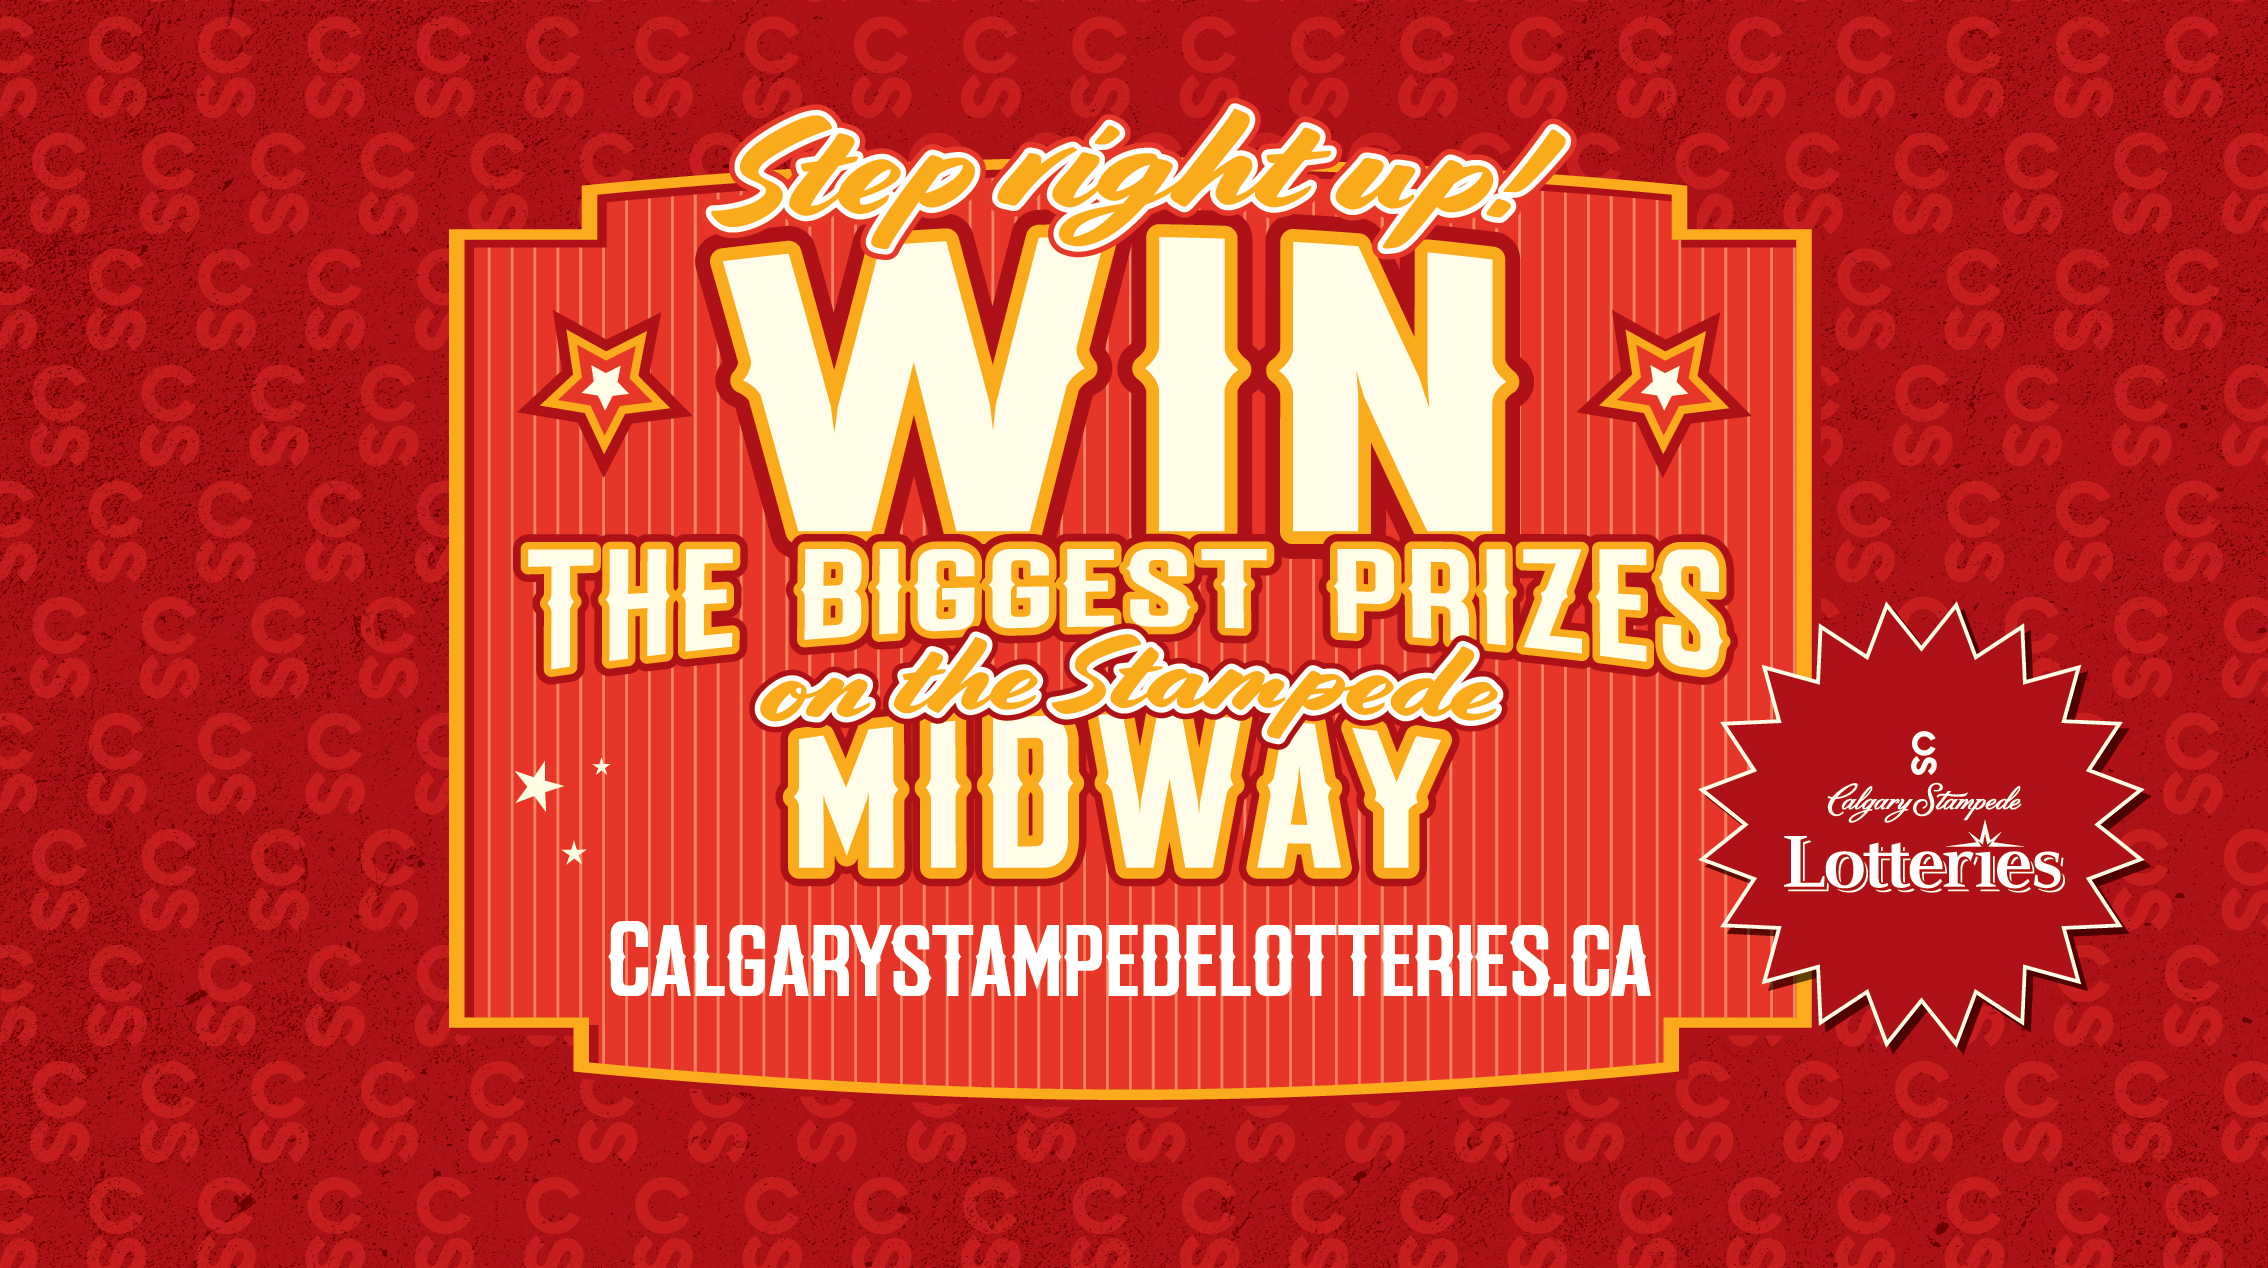 The Calgary Stampede is on! And YOU can WIN the BIGGEST prizes on the